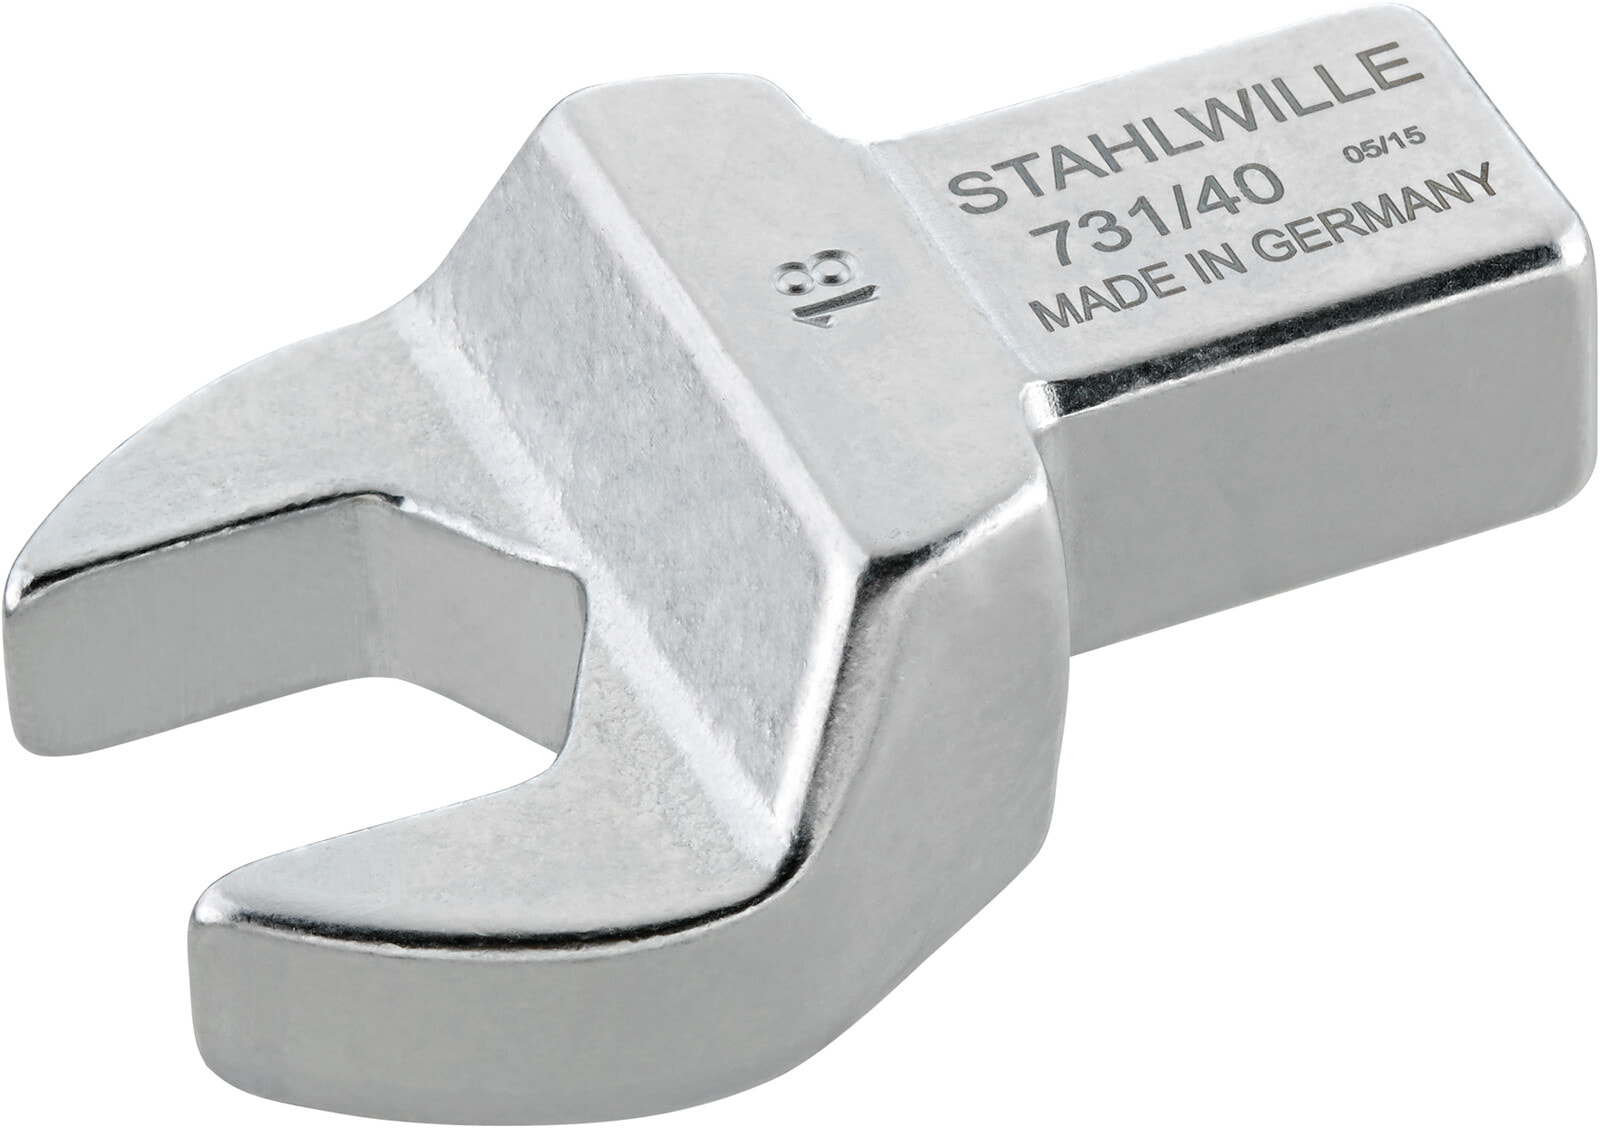 STAHLWILLE 731/40 19 Torque wrench end fitting Хромовый 19 mm 1 шт 58214019